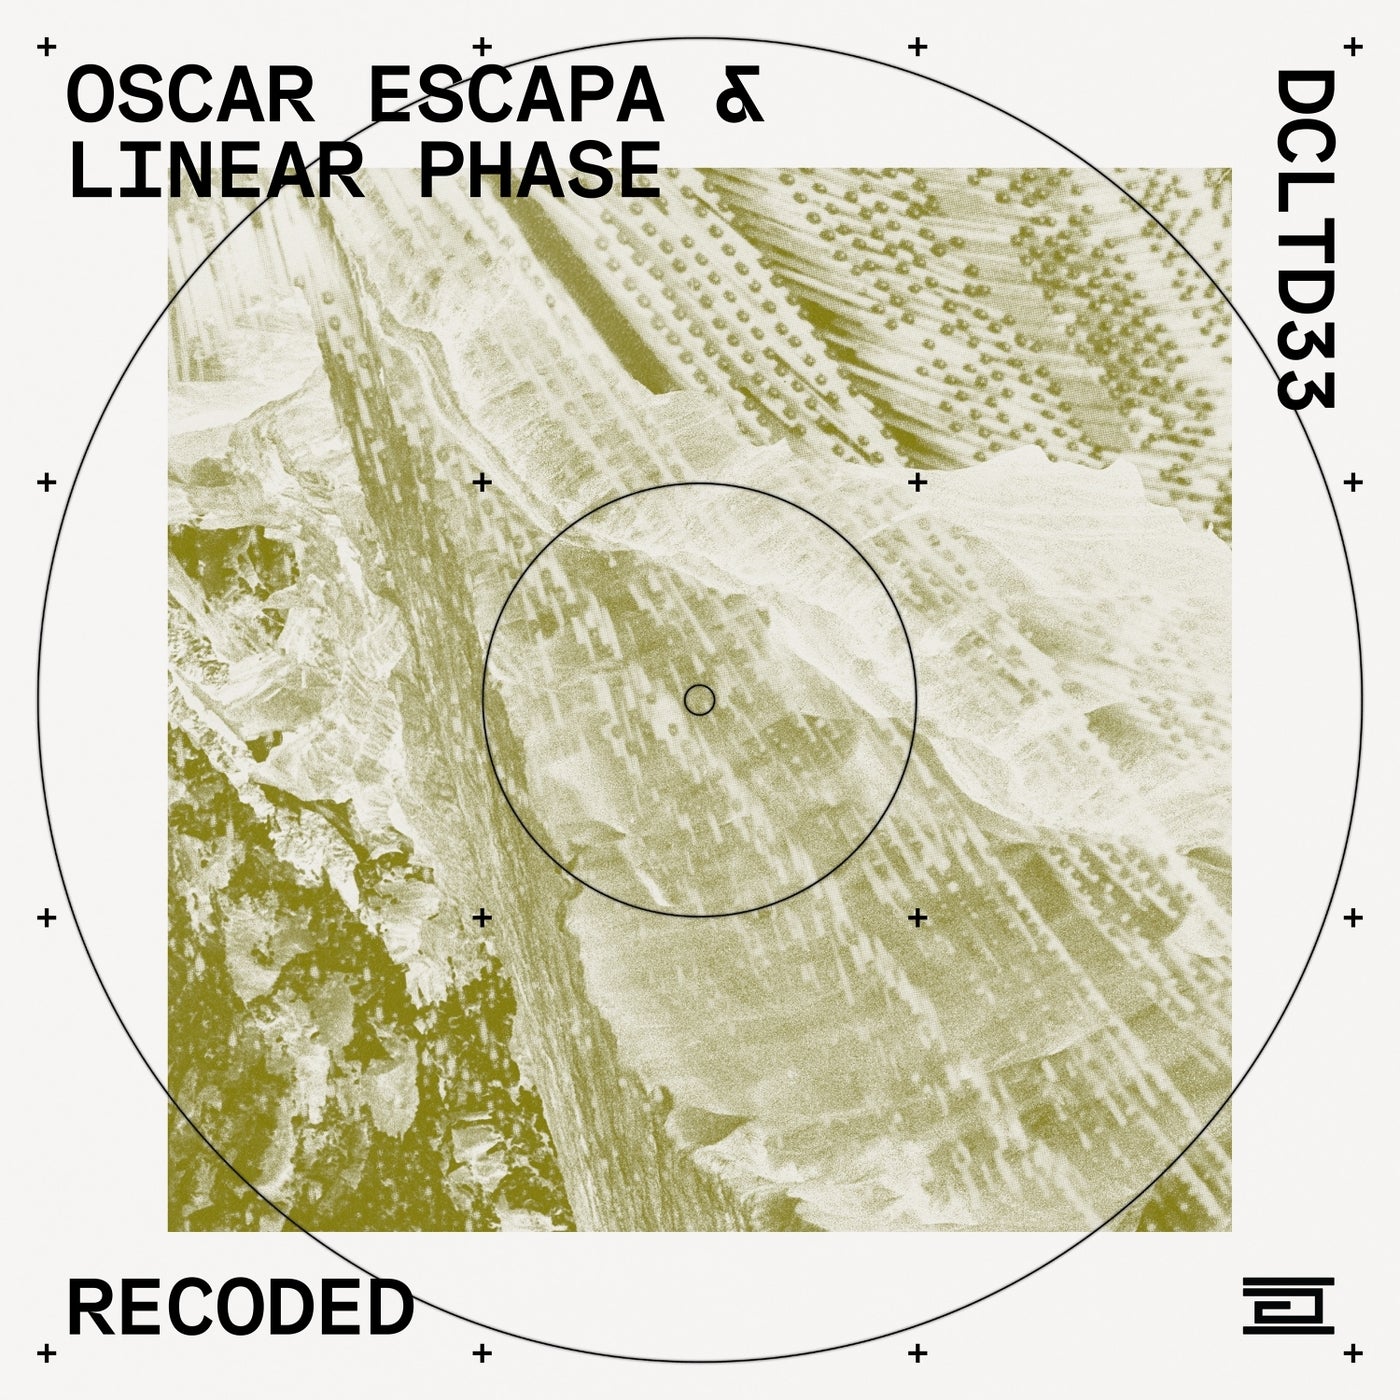 image cover: Oscar Escapa, Linear Phase - Recoded on DCLTD